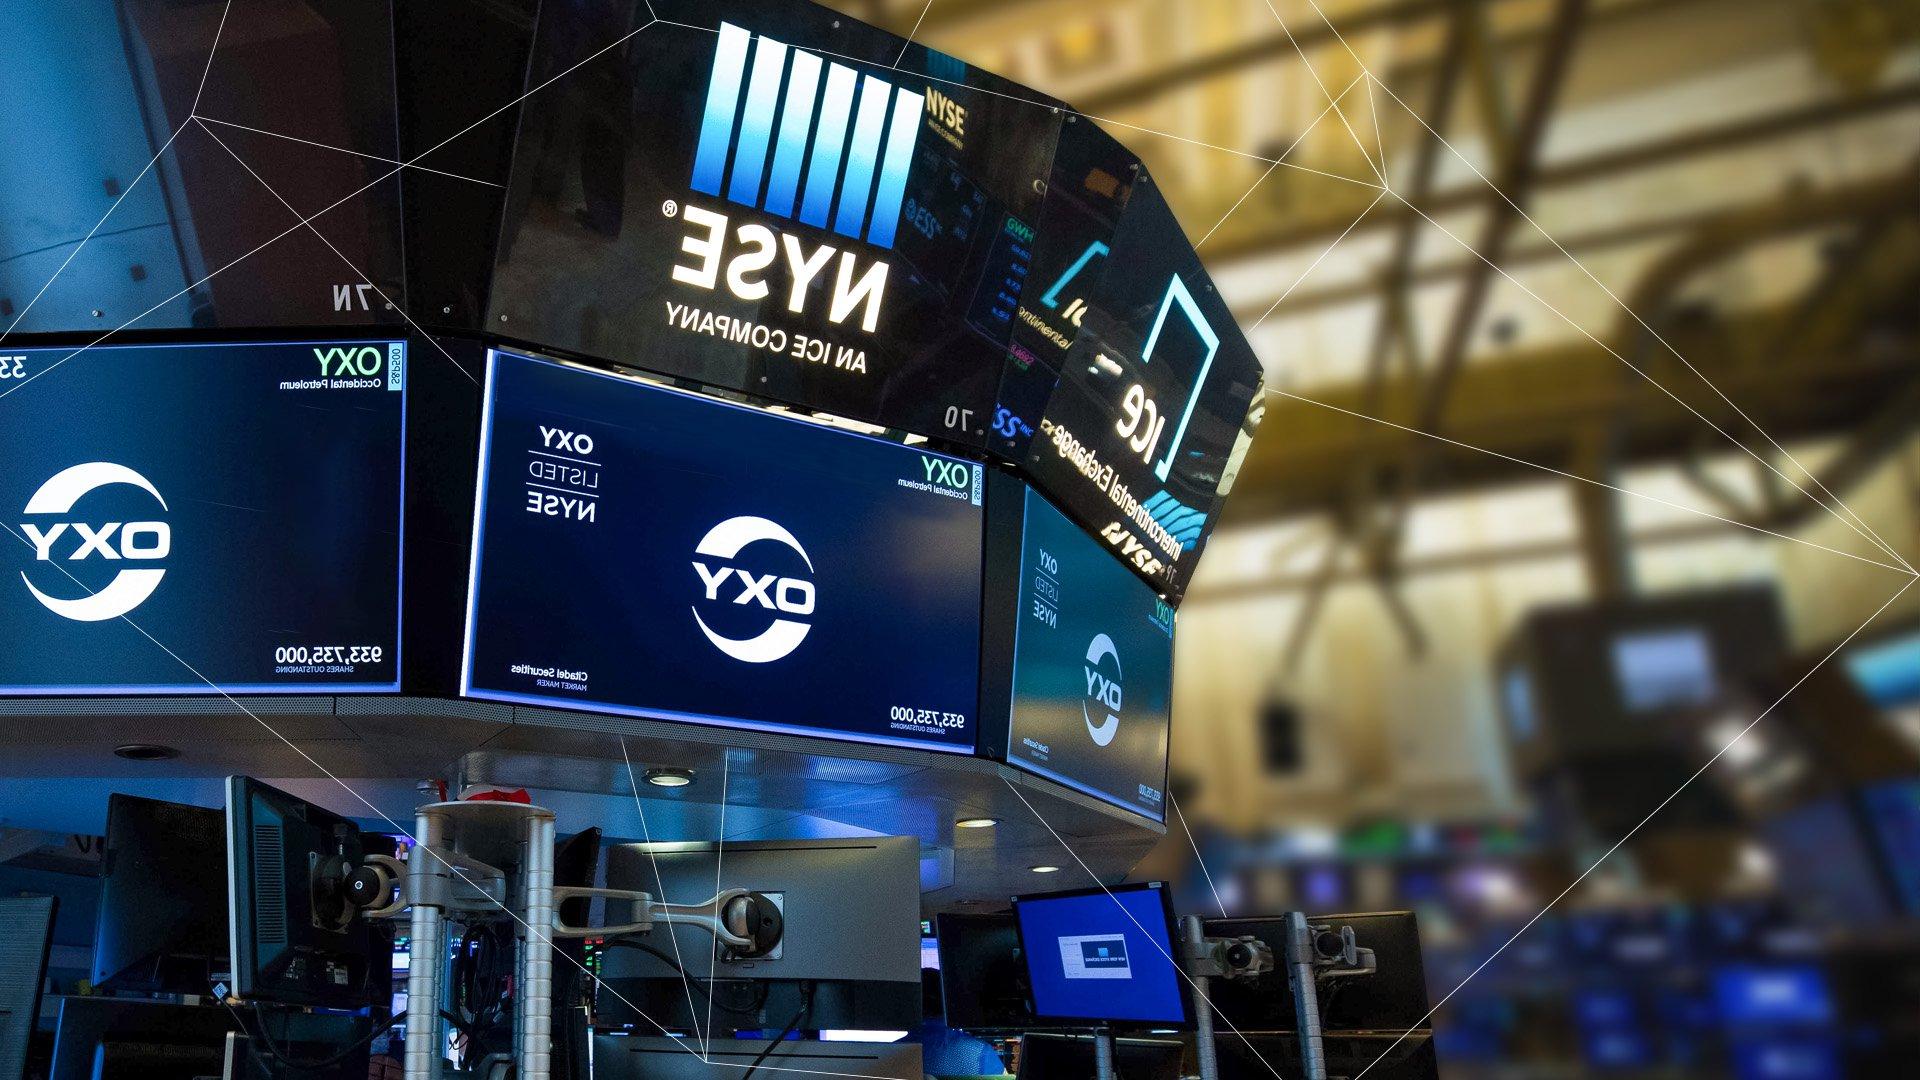 Oxy logo on screens at the NYSE